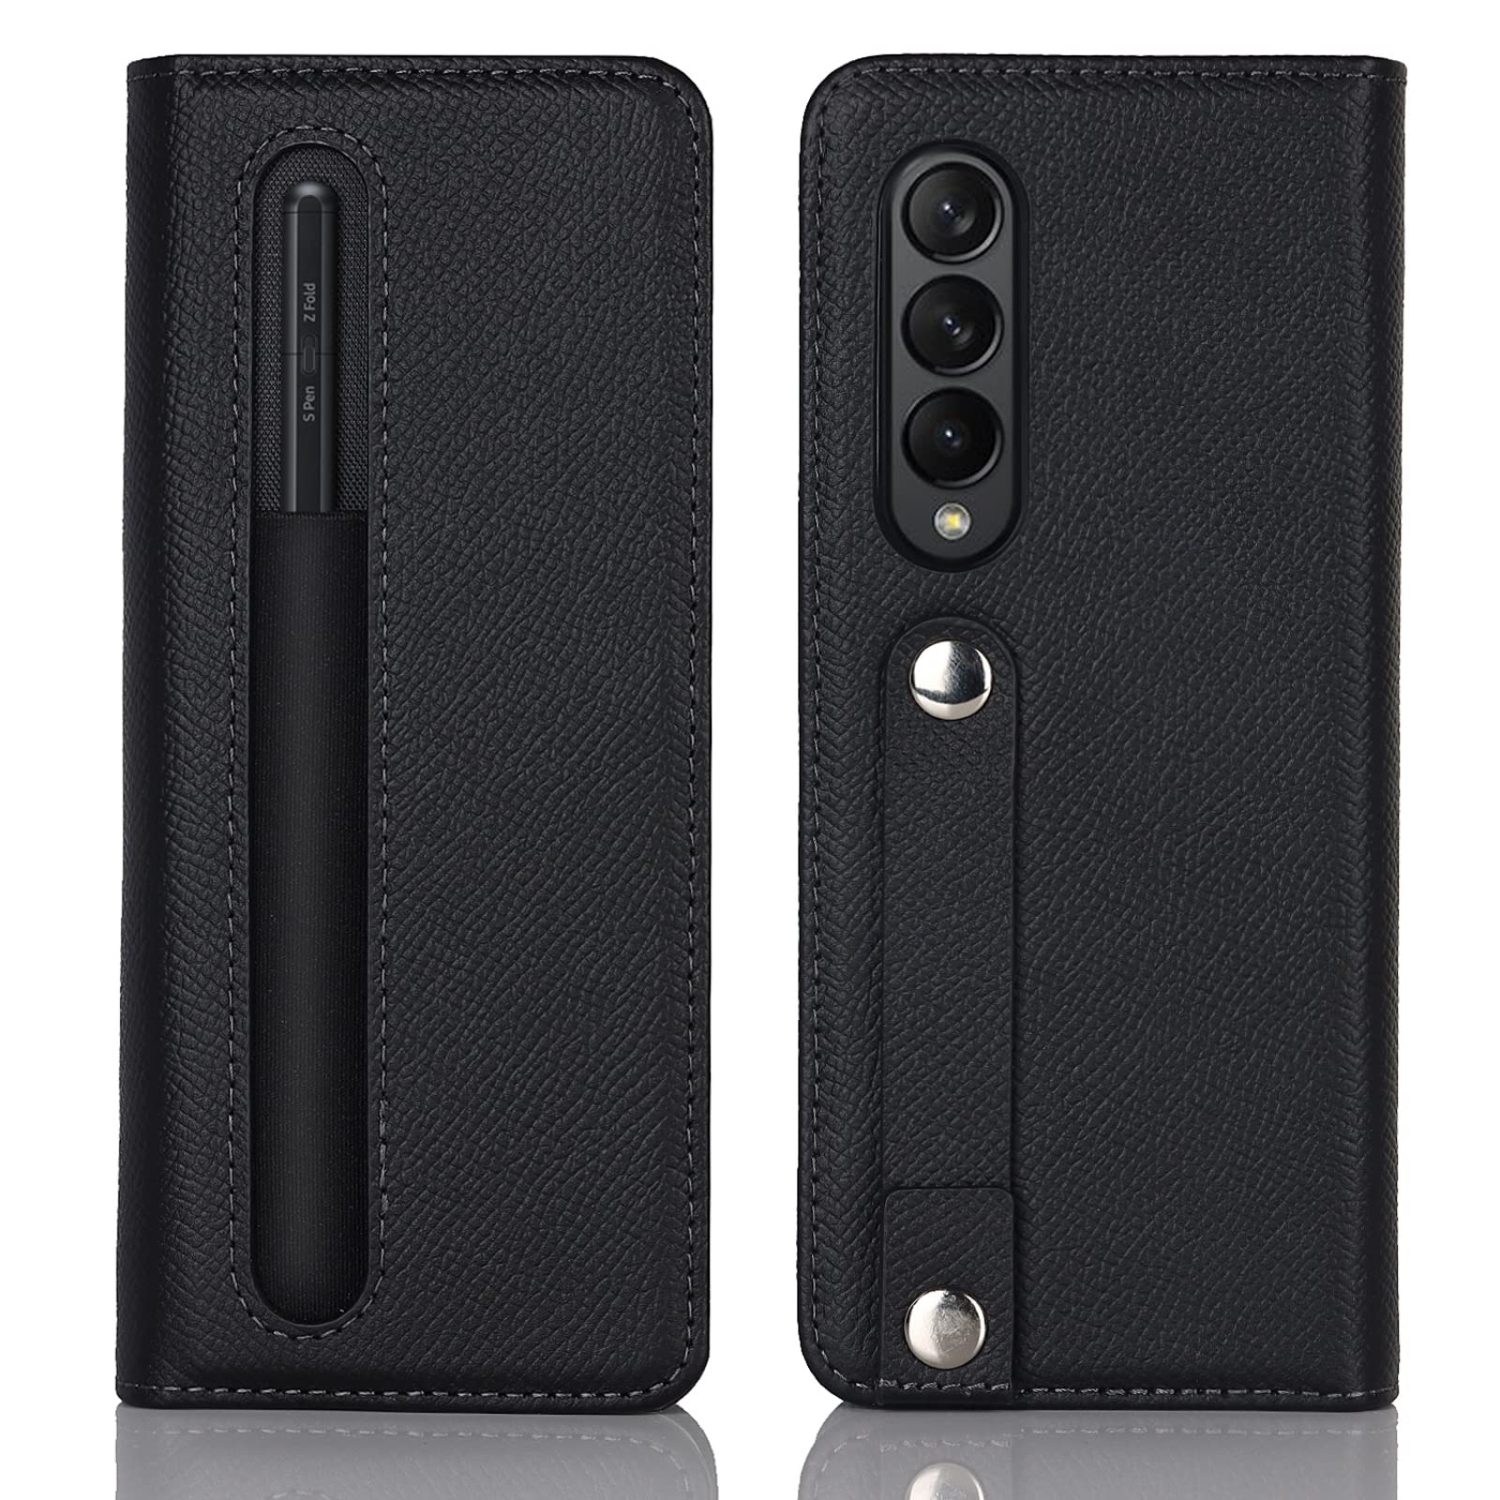 NUOUN Wallet Case for Samsung Galaxy Z Fold 3 5G (2021) with Stand, Magnetic Kickstand  Genuine Leather Protective Pencil Ca